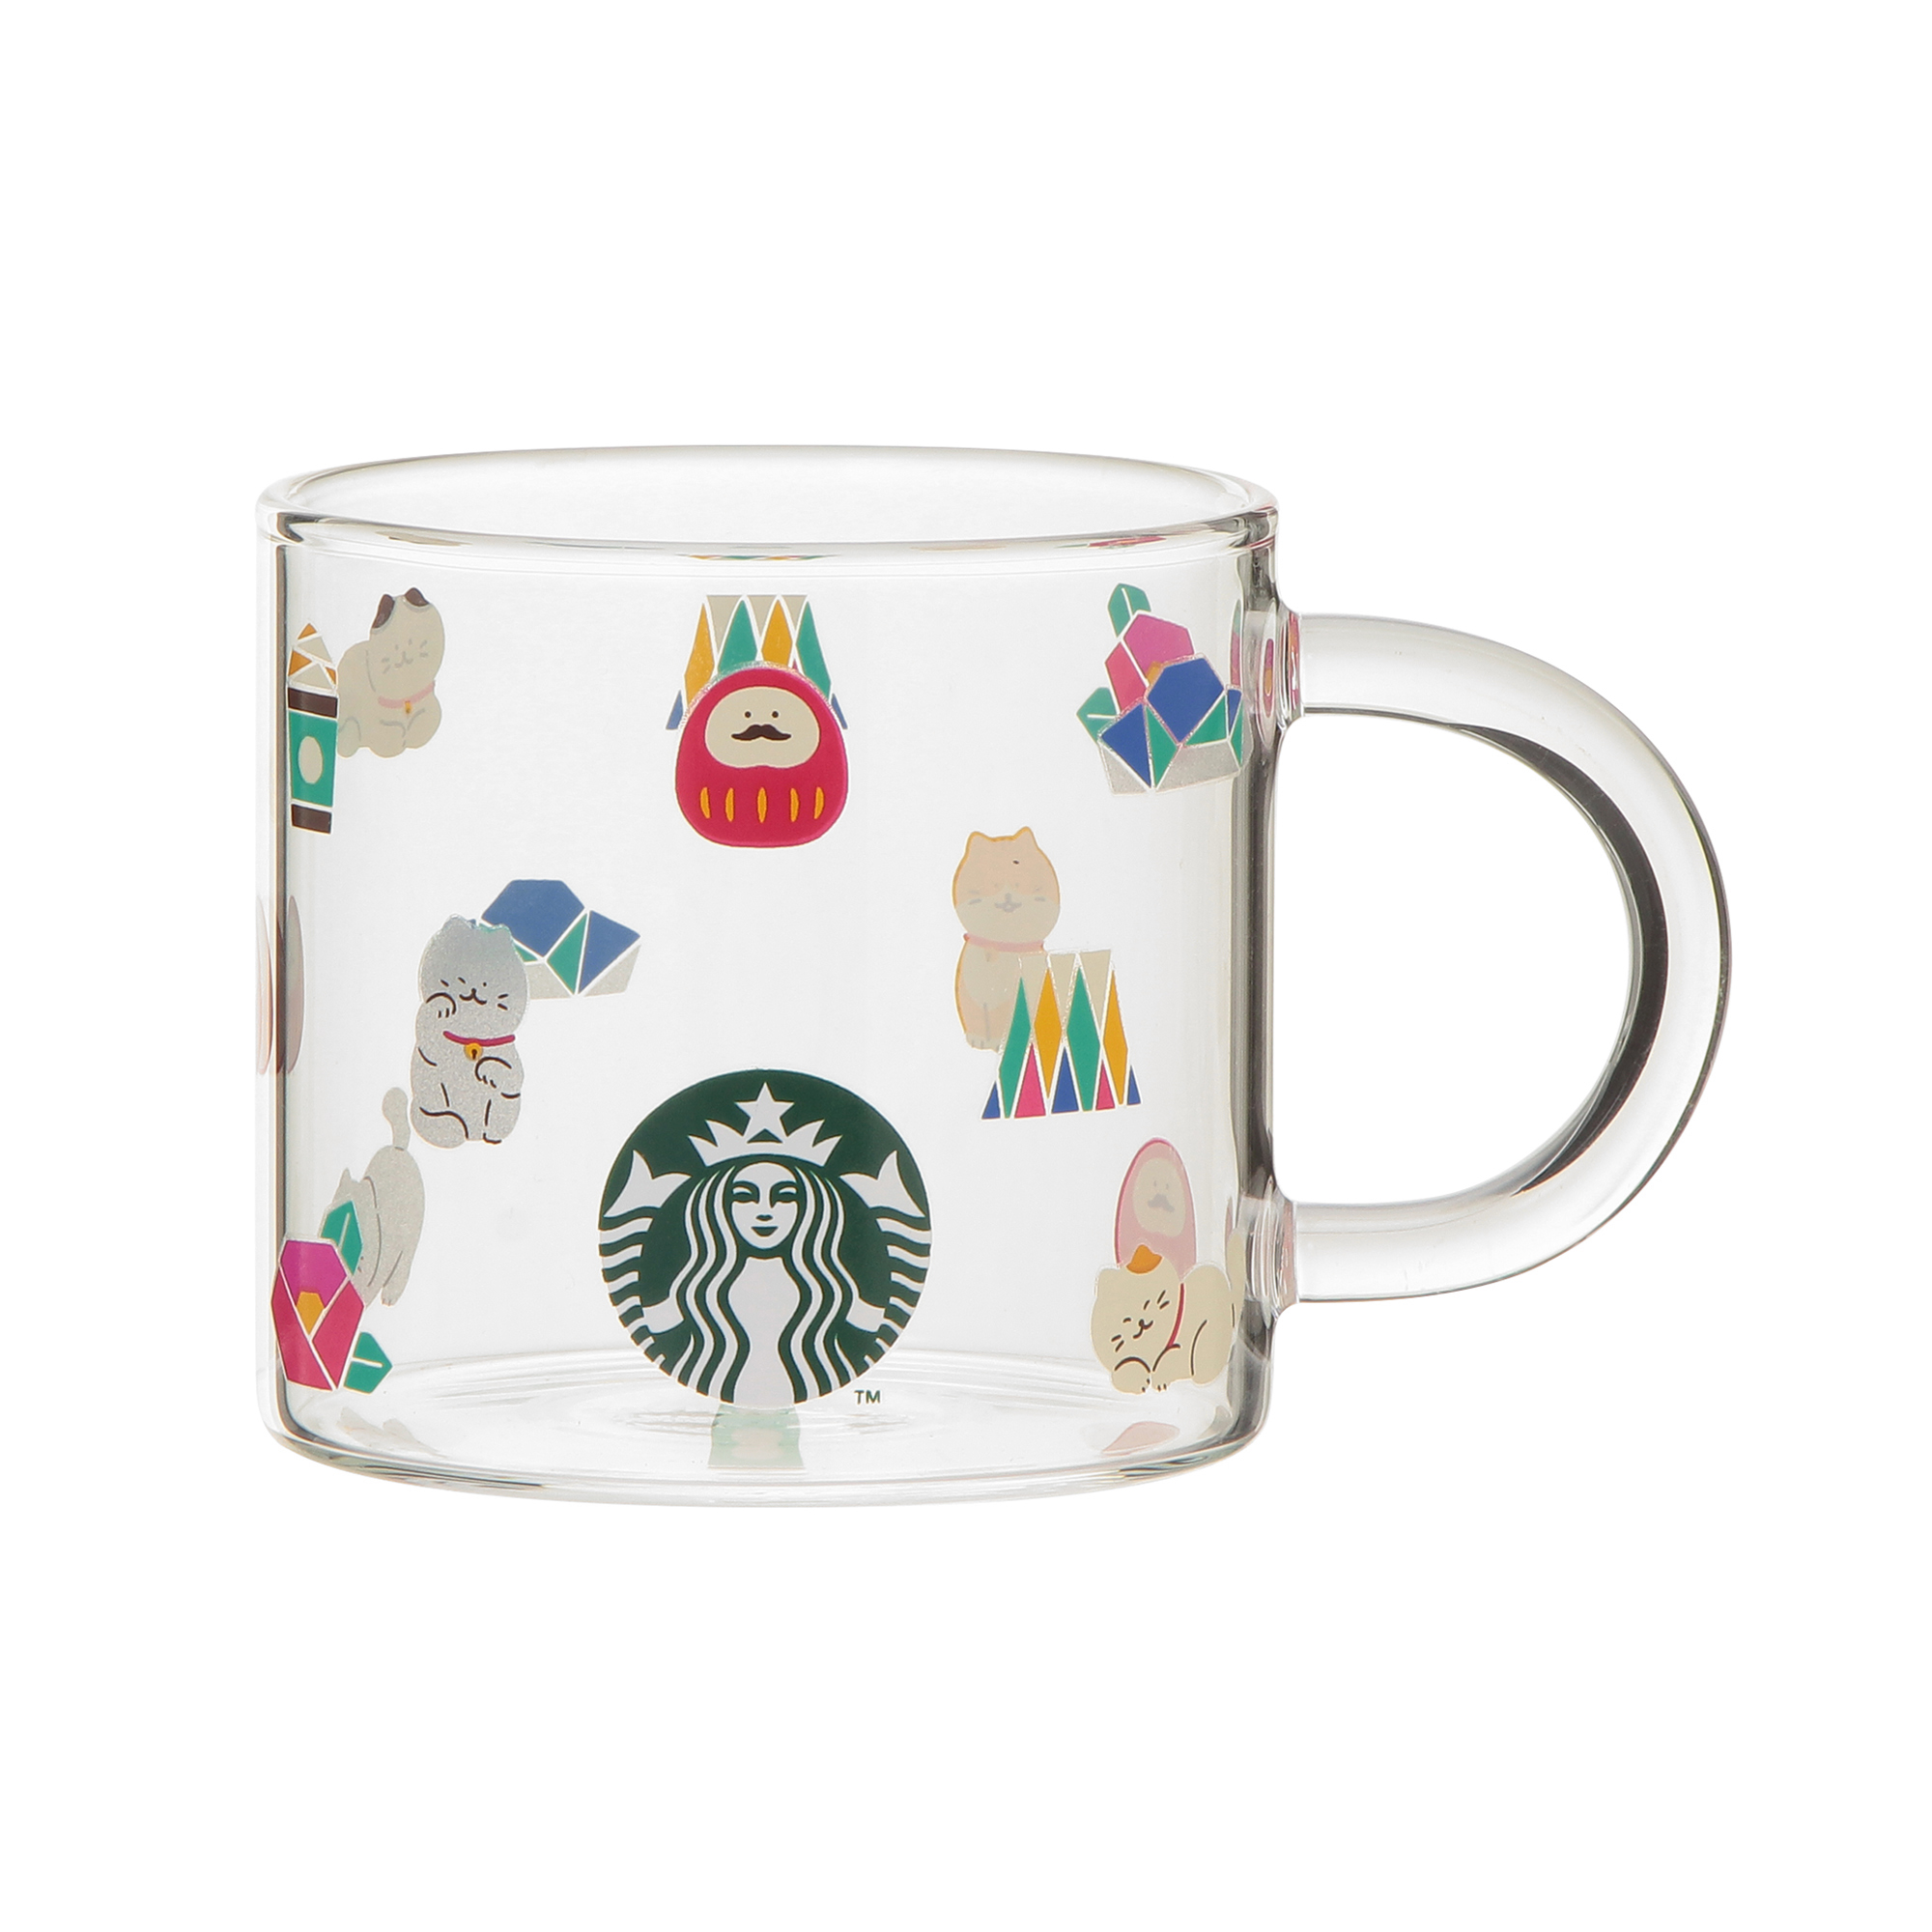 Starbucks Japan unveils New Year's collection for 2024, with 